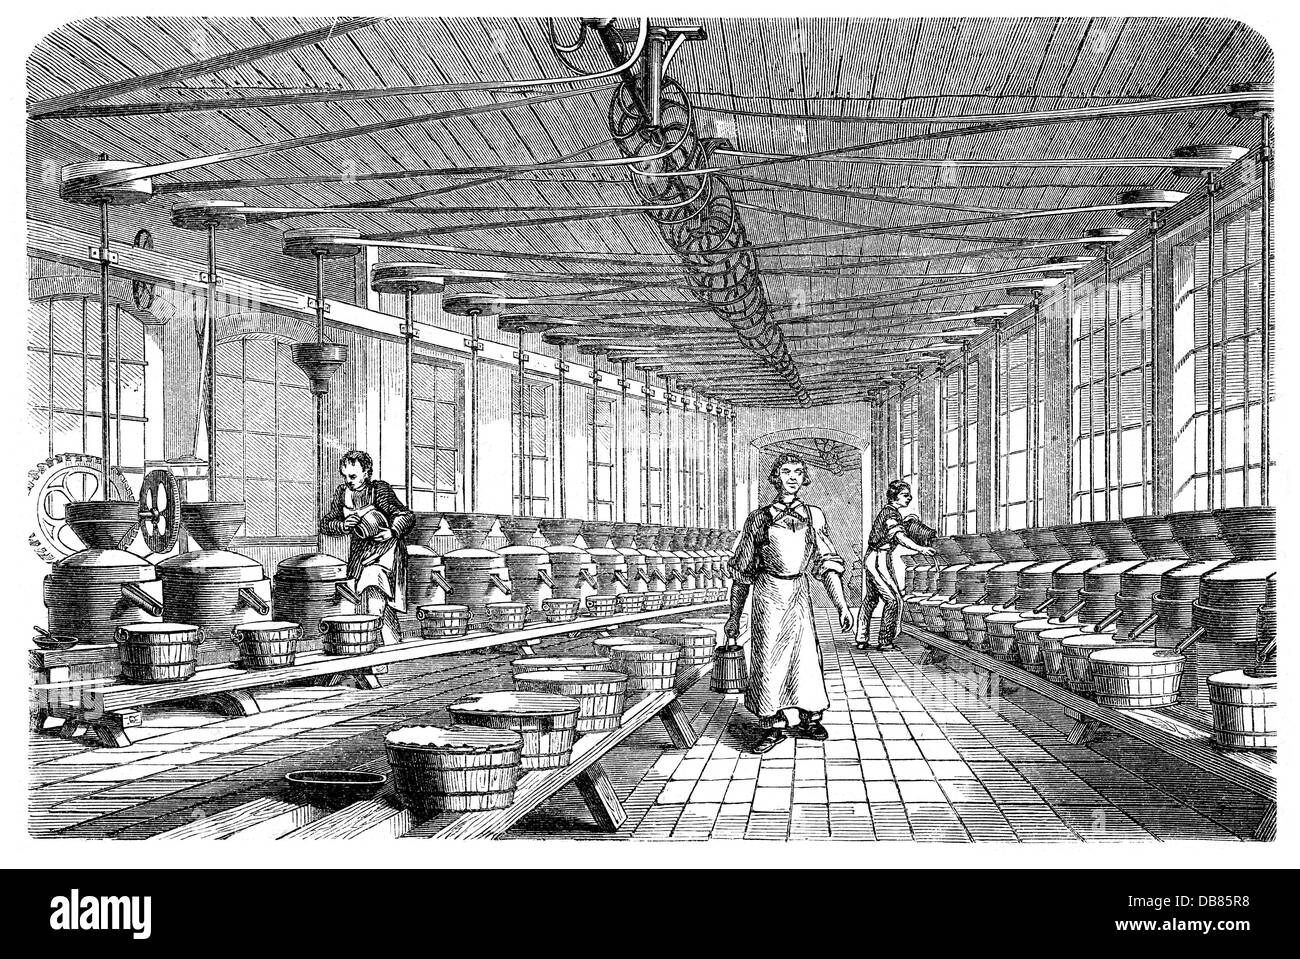 industry, pencil production, elutriation room, pencil plant Grossberger and Kurz, Nuremberg, wood engraving, 2nd half 19th century, pencil, pencils, writing utensil, writing utensils, work, works, factory building, factory buildings, hall, halls, elutriate, clean, people, workers, worker, men, man, Kingdom of Bavaria, Germany, Franconia, interior view, technics, belt drive, belt, belts, manufacture, fabrication, industry, industries, historic, historical, Additional-Rights-Clearences-Not Available Stock Photo